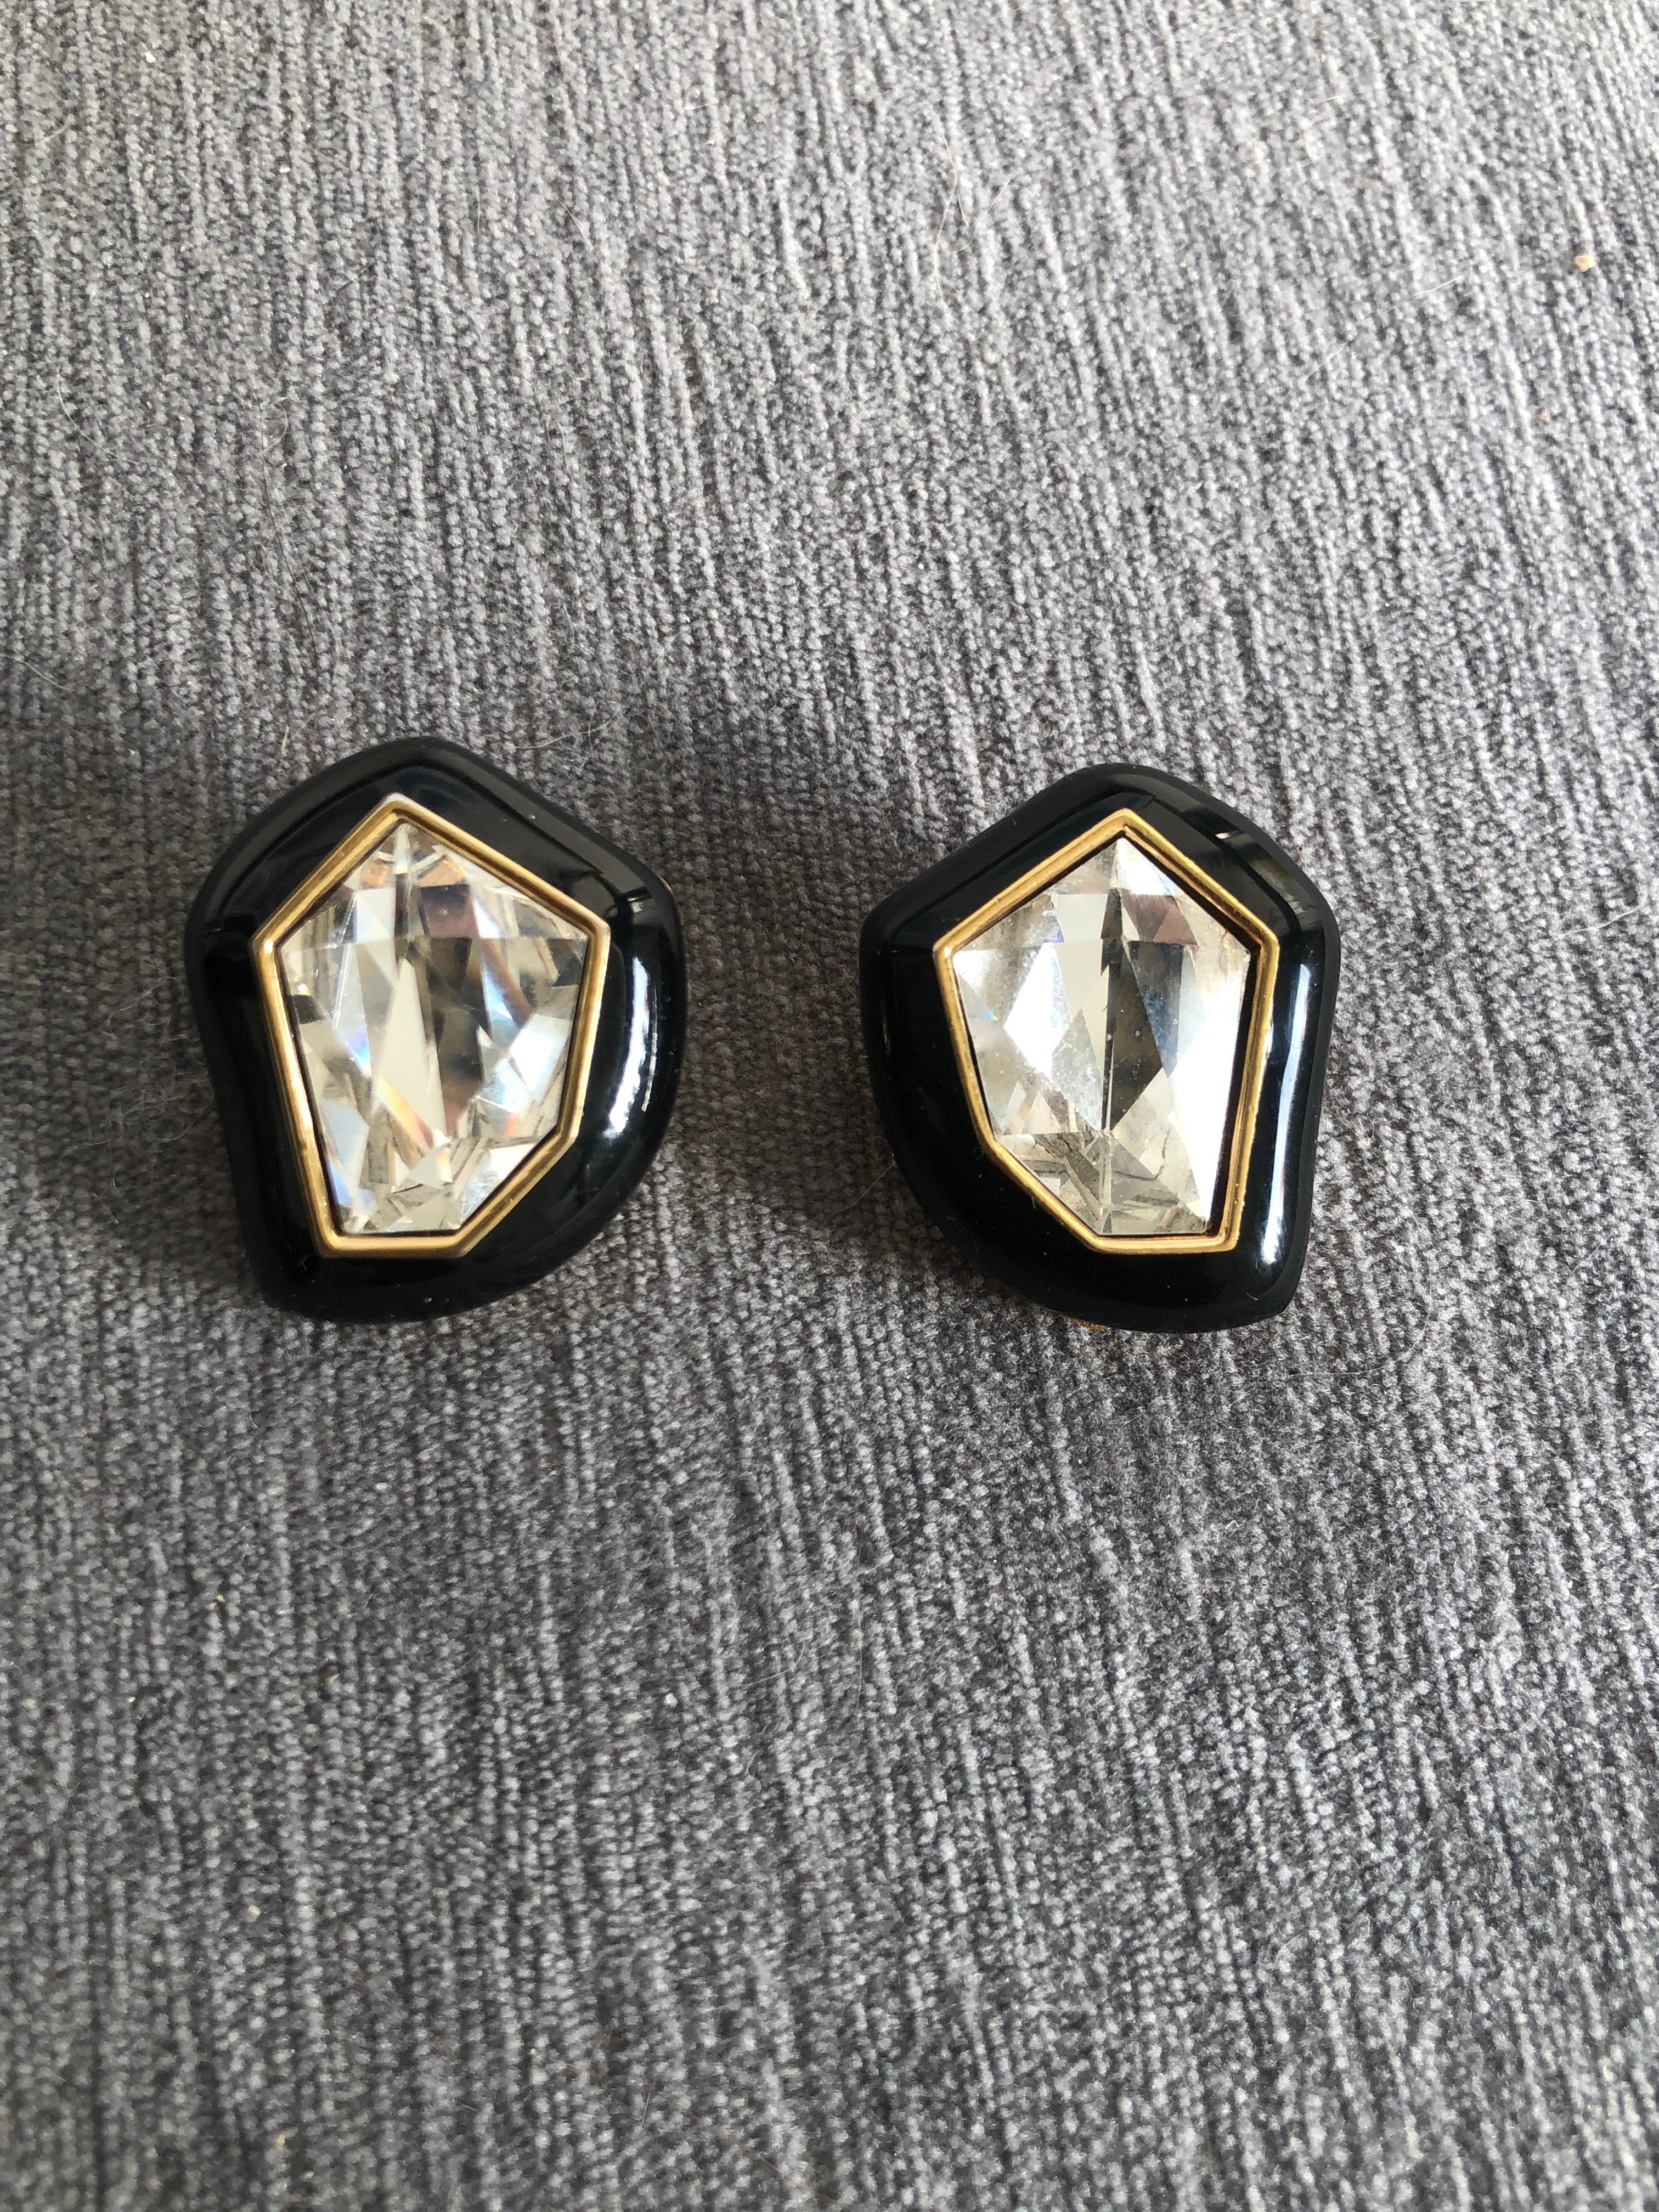 Pair of Vintage Modernist Glam Clip Earrings by Daniel Swarovski  In Good Condition For Sale In Palm Springs, CA